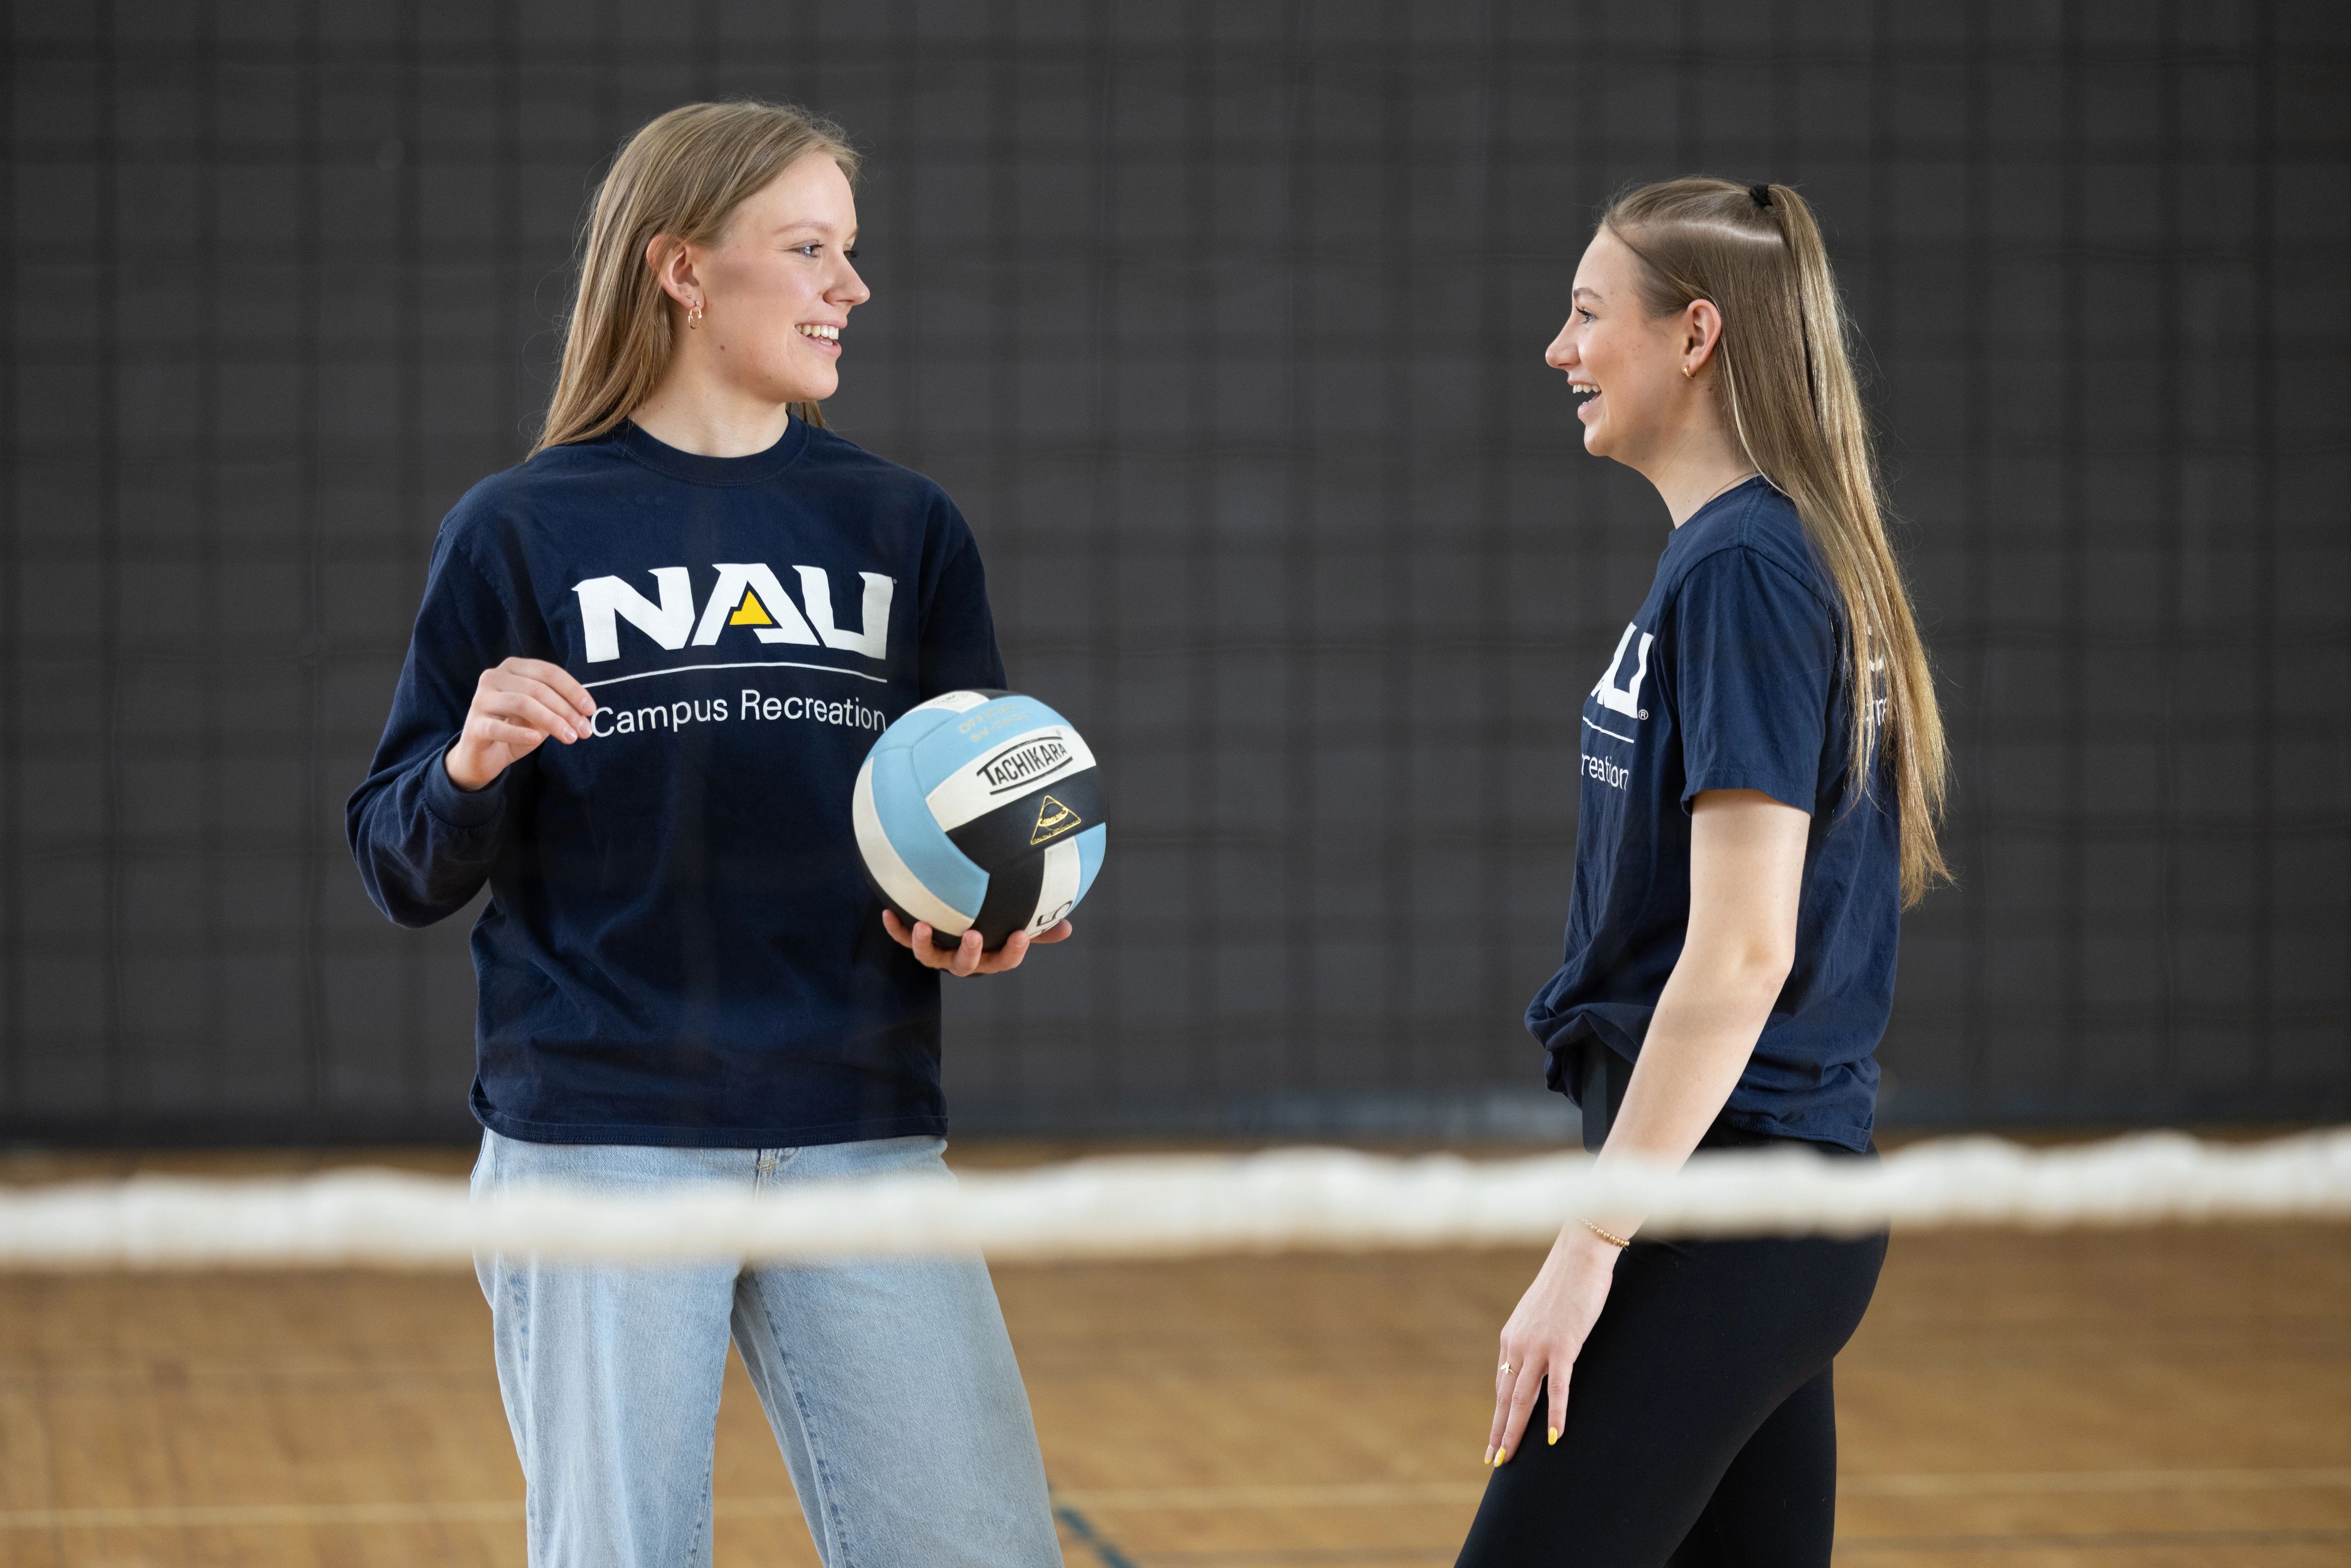 Female student holding a volleyball talking to another student in indoor volleyball court.